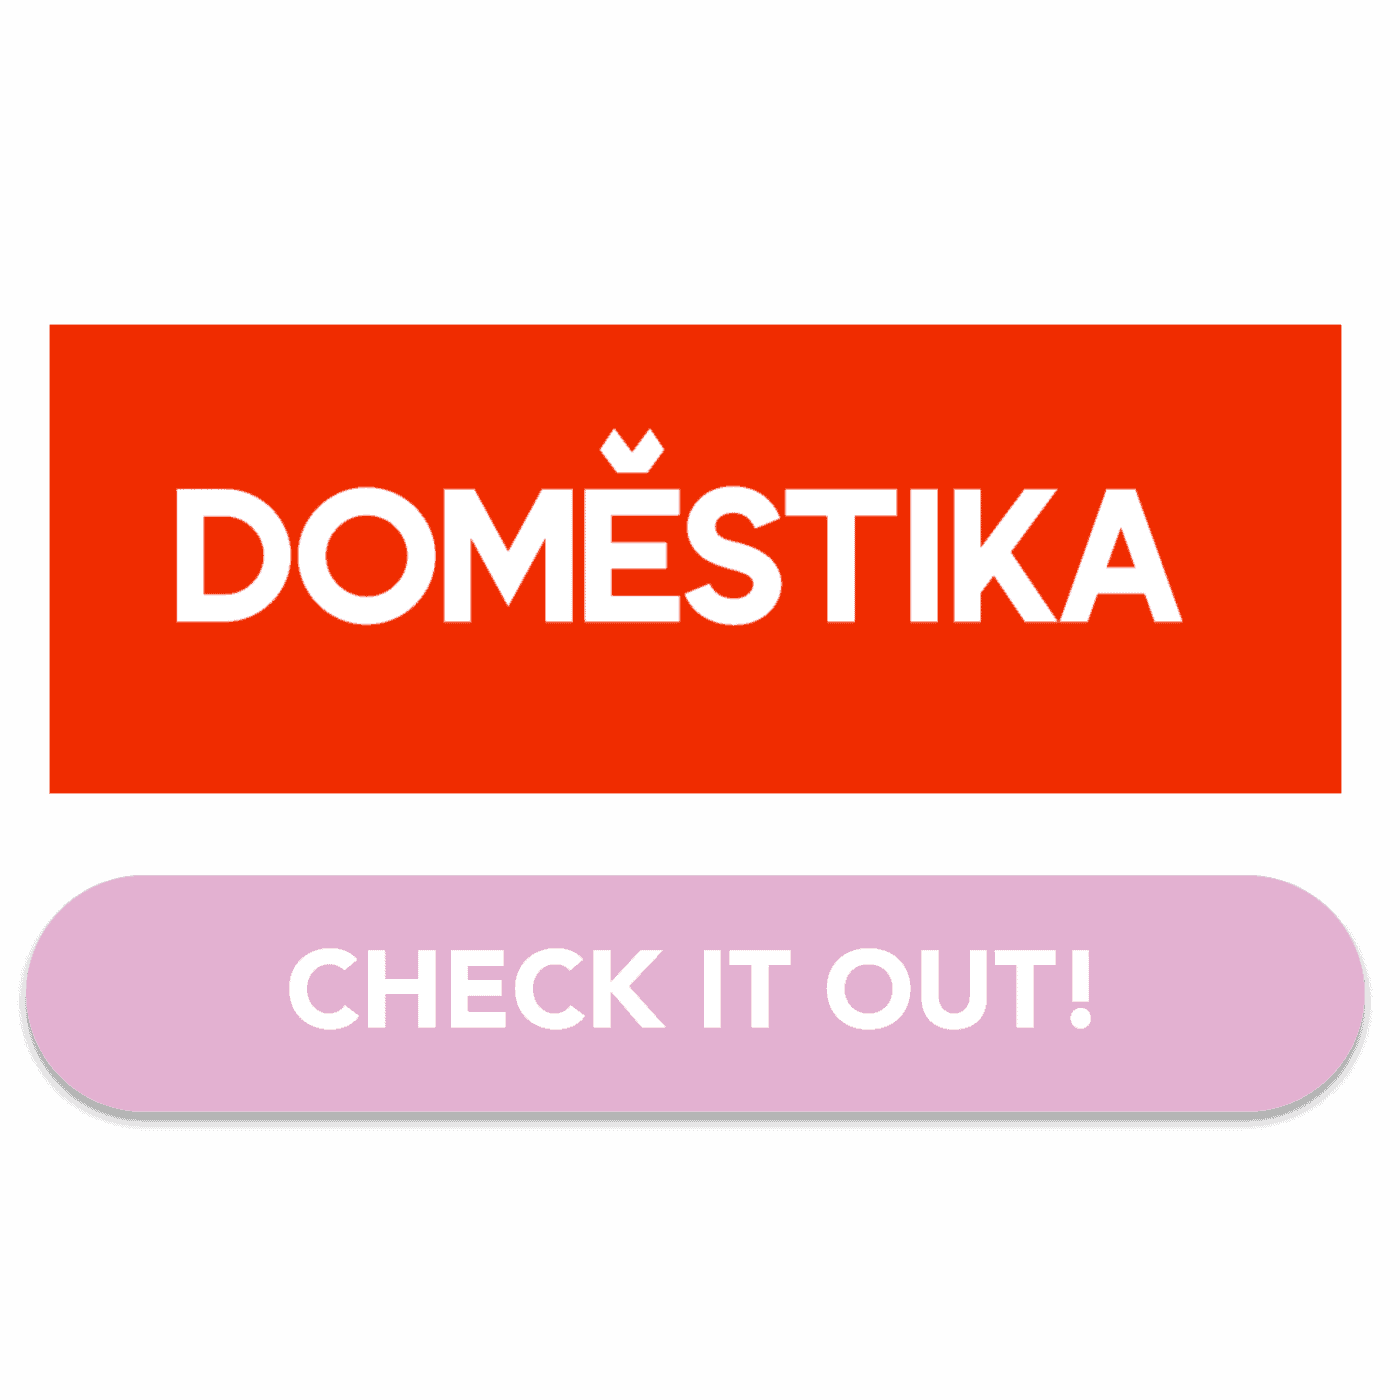 Domestika has so many courses that you can take to better your skills! Give it a shot!